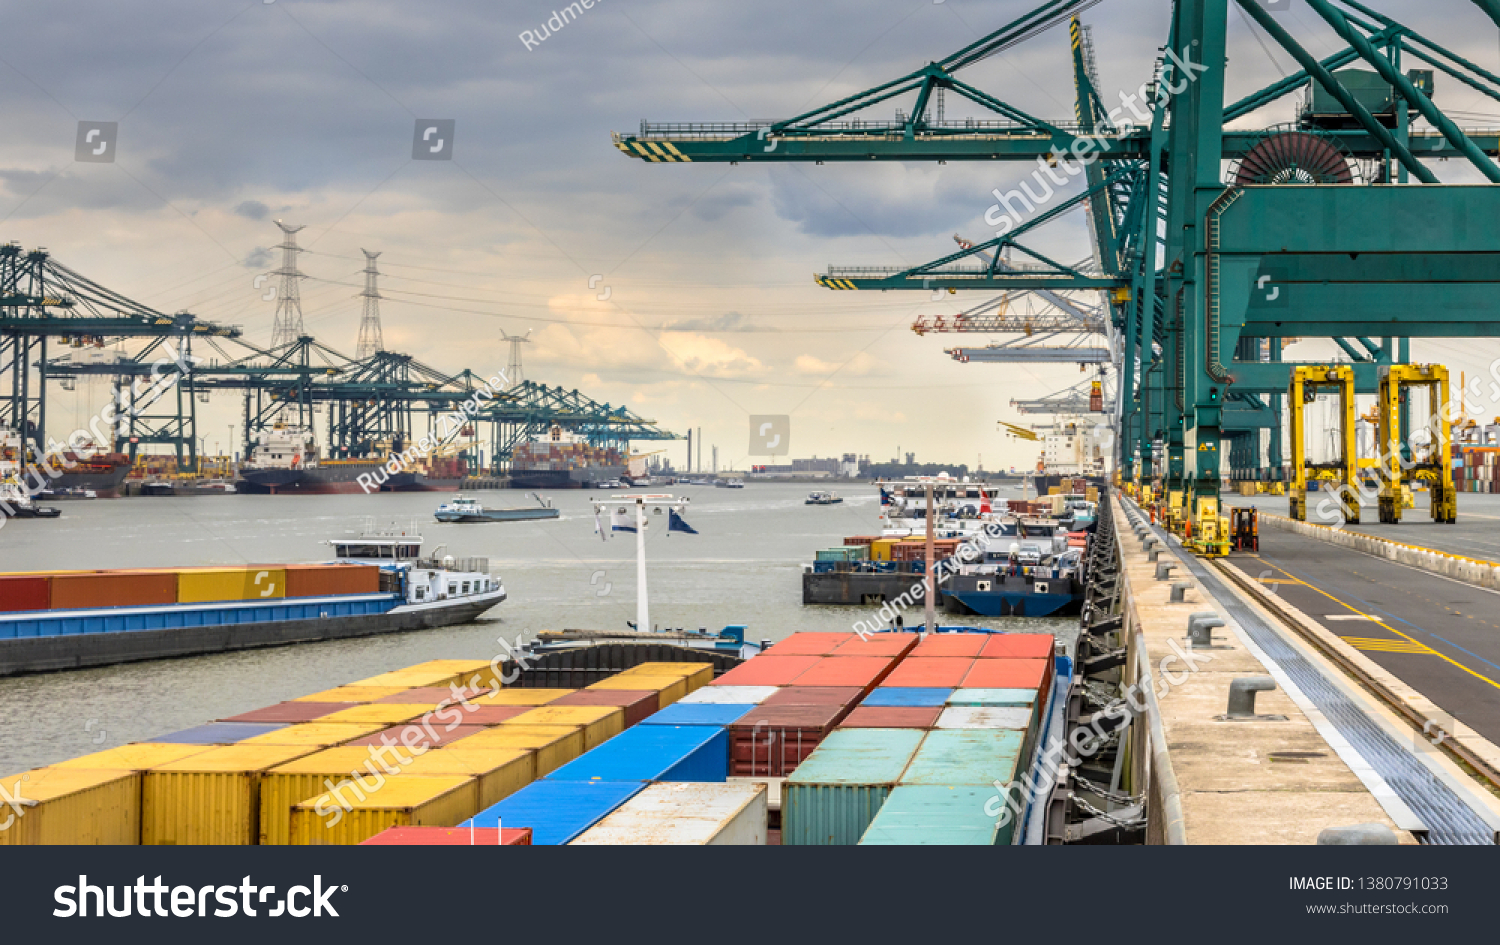 Loaded ships in busy port of Antwerp at container terminal with automated cranes and lots of vessels. Belgium #1380791033